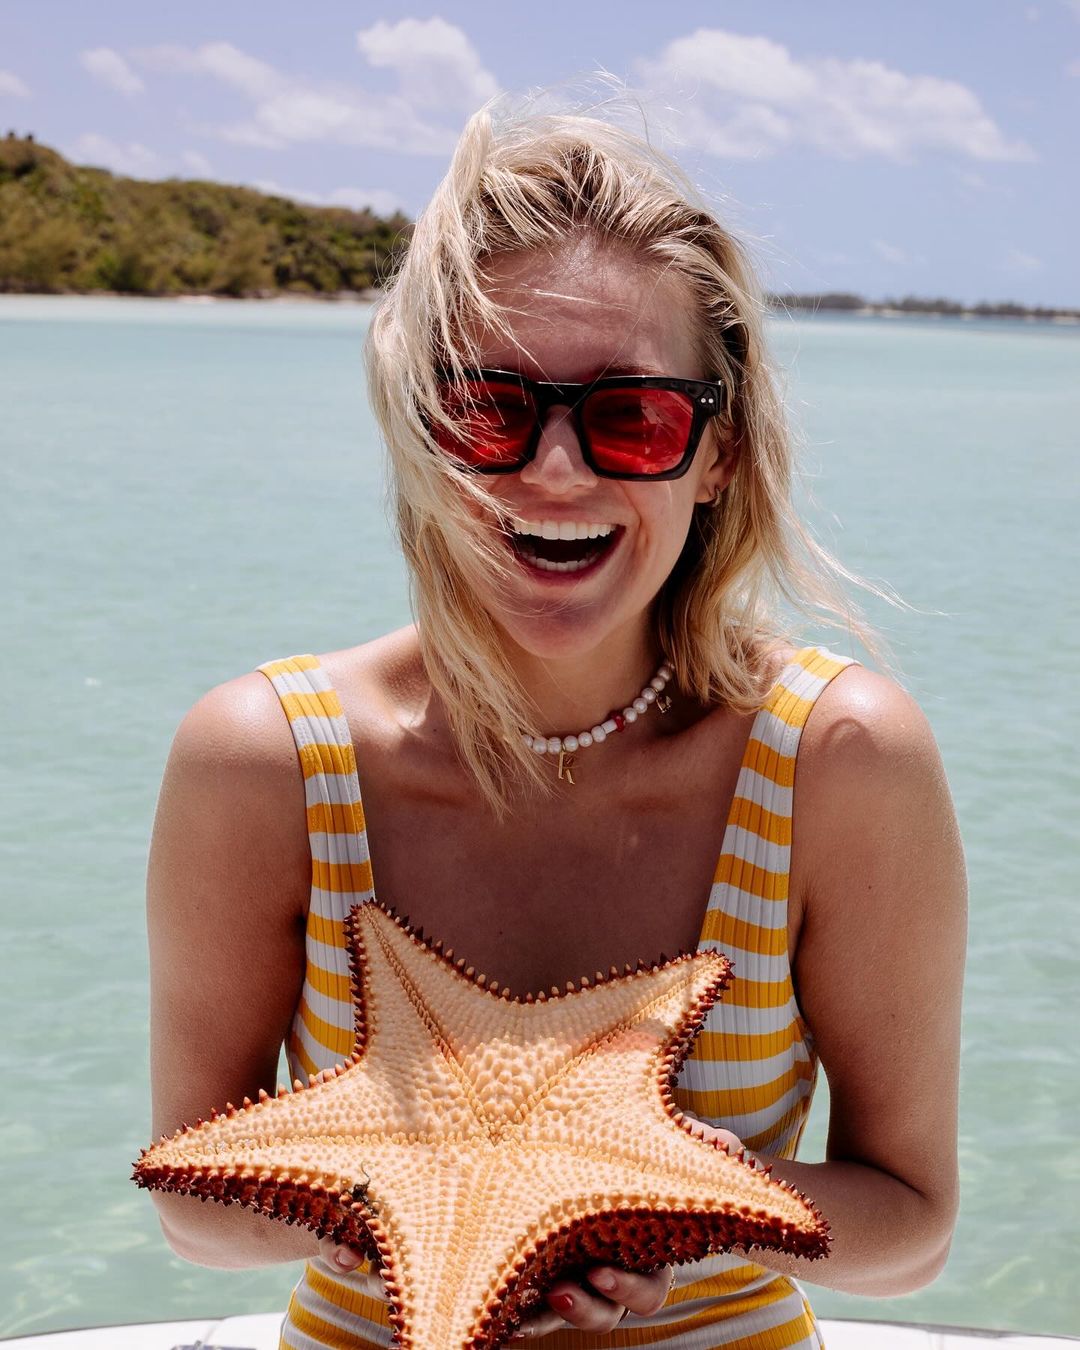 The first pic showed the I Quit Drinking singer laughing on a boat while holding a giant starfish